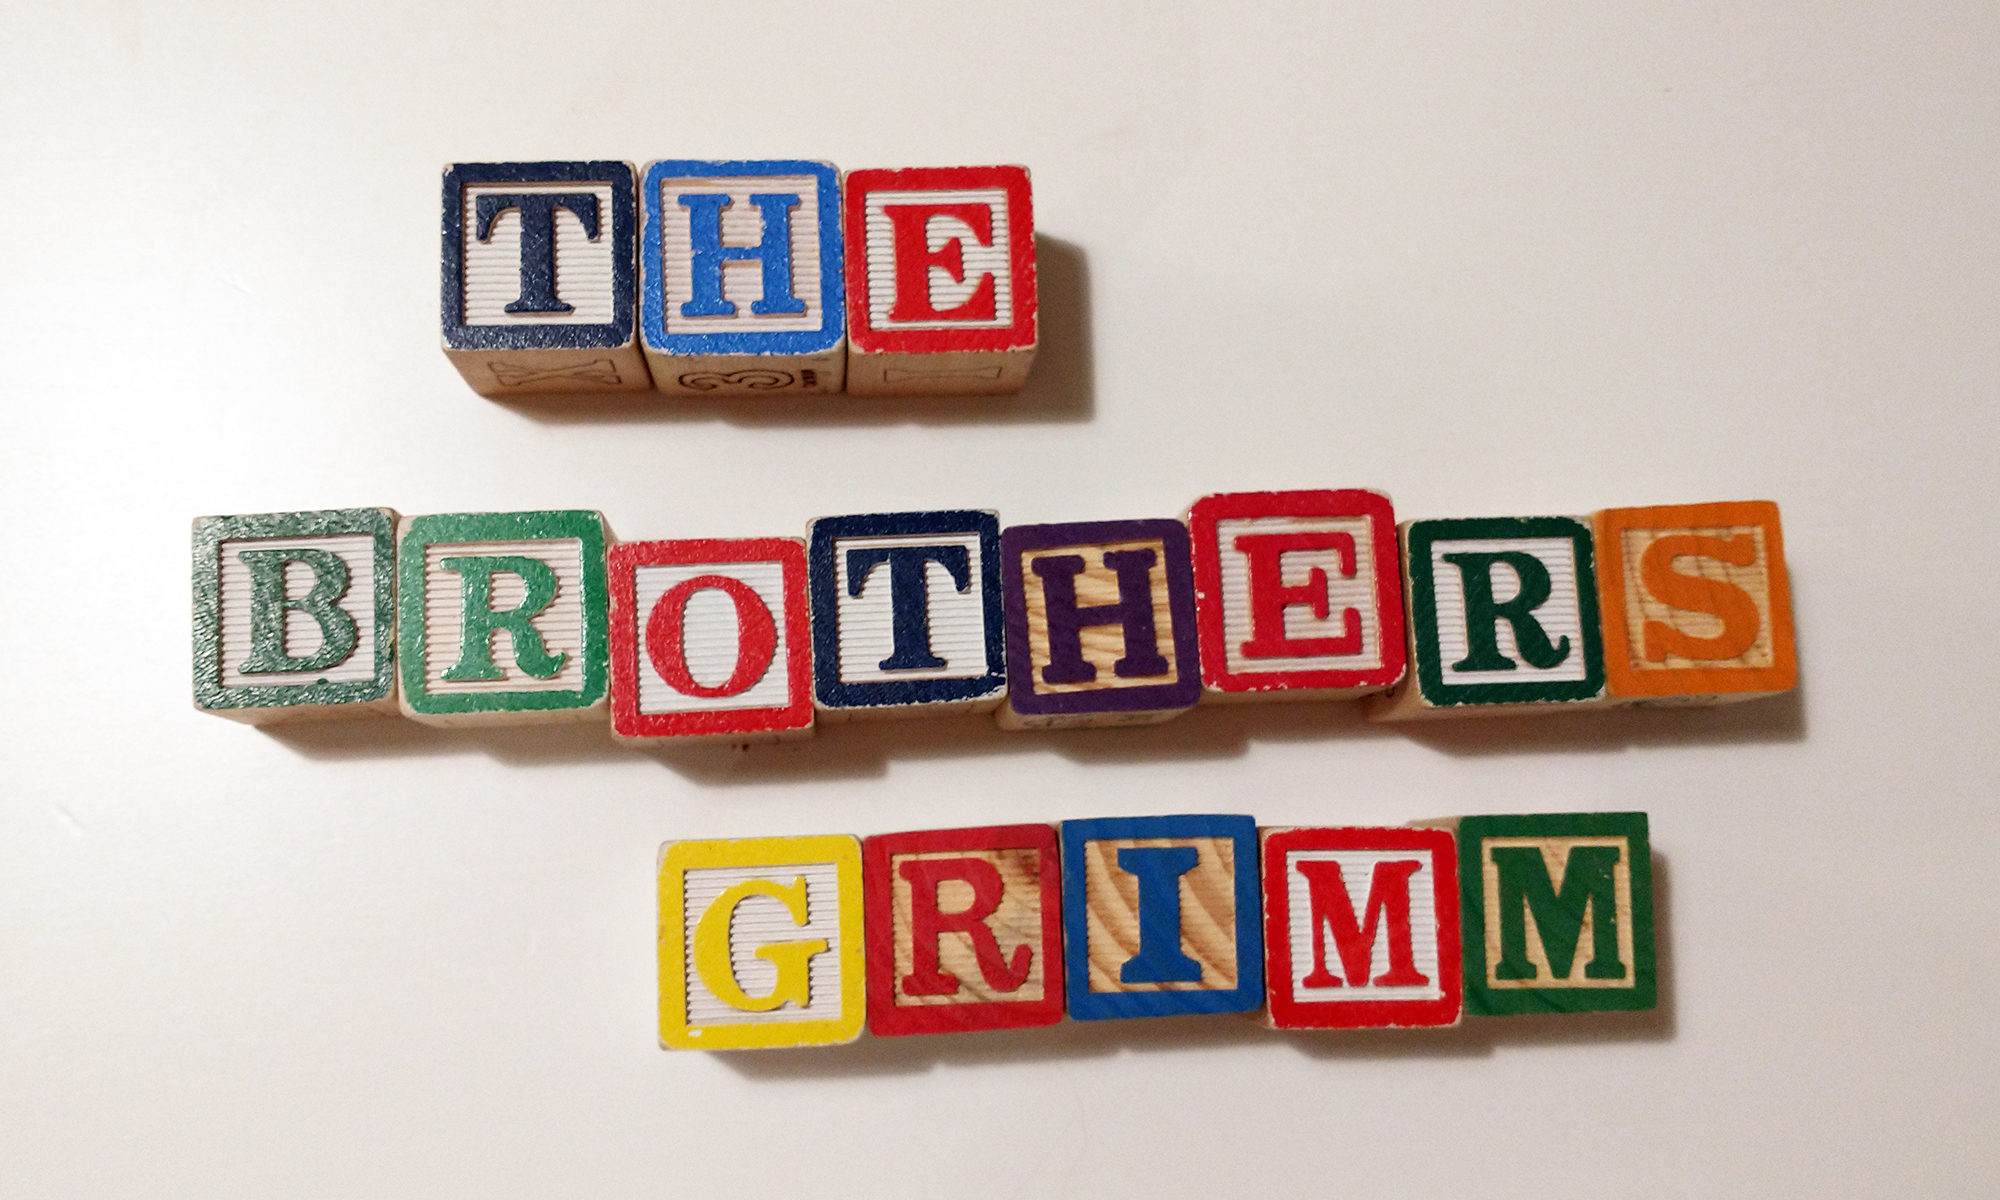 7 – How the Brothers Grimm Saved Folk Culture